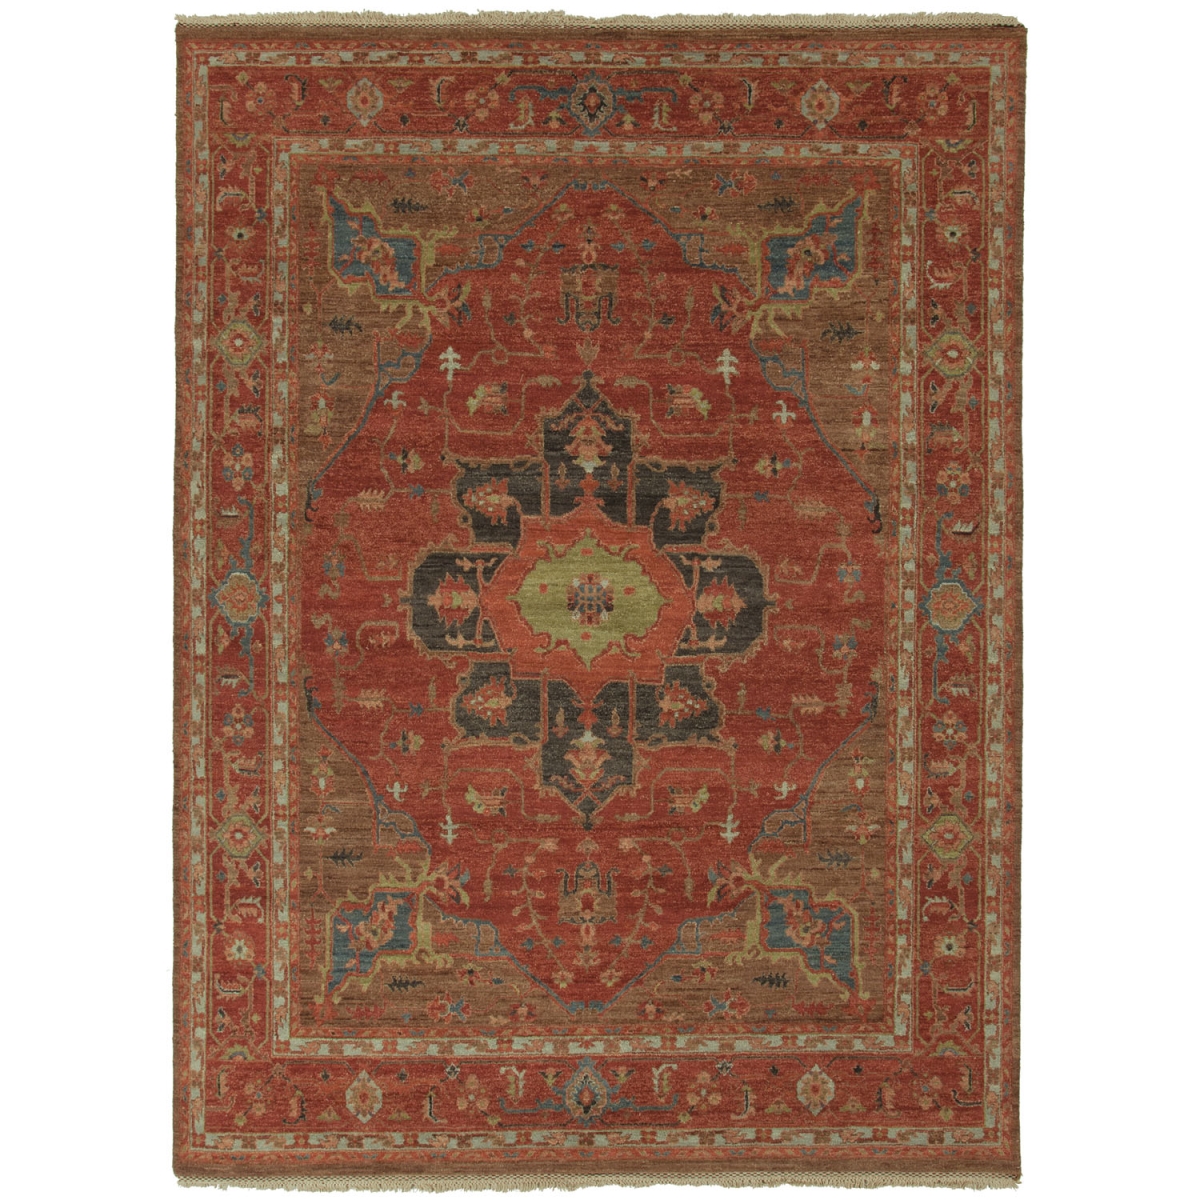 Rug104275 9 X 12 Ft. Uptown Artemis York Hand-knotted Medallion Red & Brown Area Rug